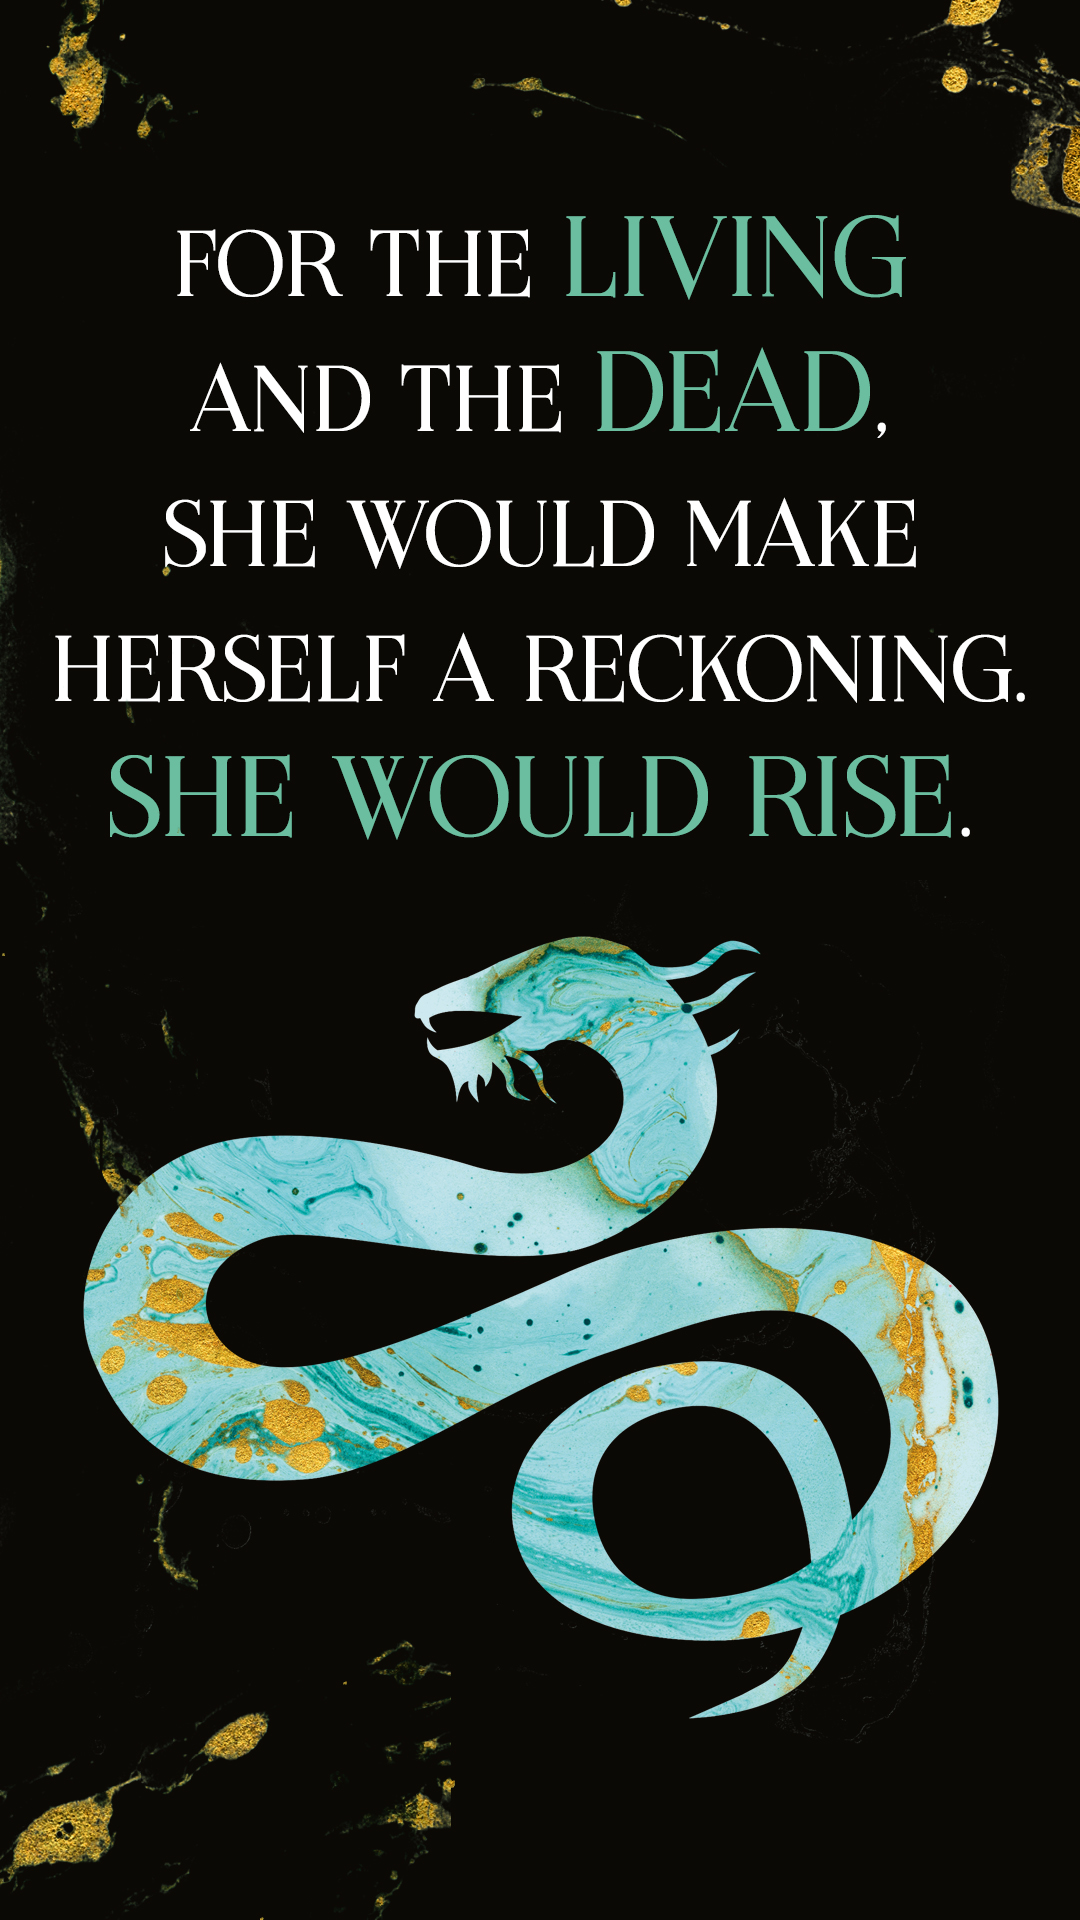 Graphic image featuring a blue and gold snake against a black background intertwined with the text "for the living and the dead, she would make herself a reckoning. she would rise.